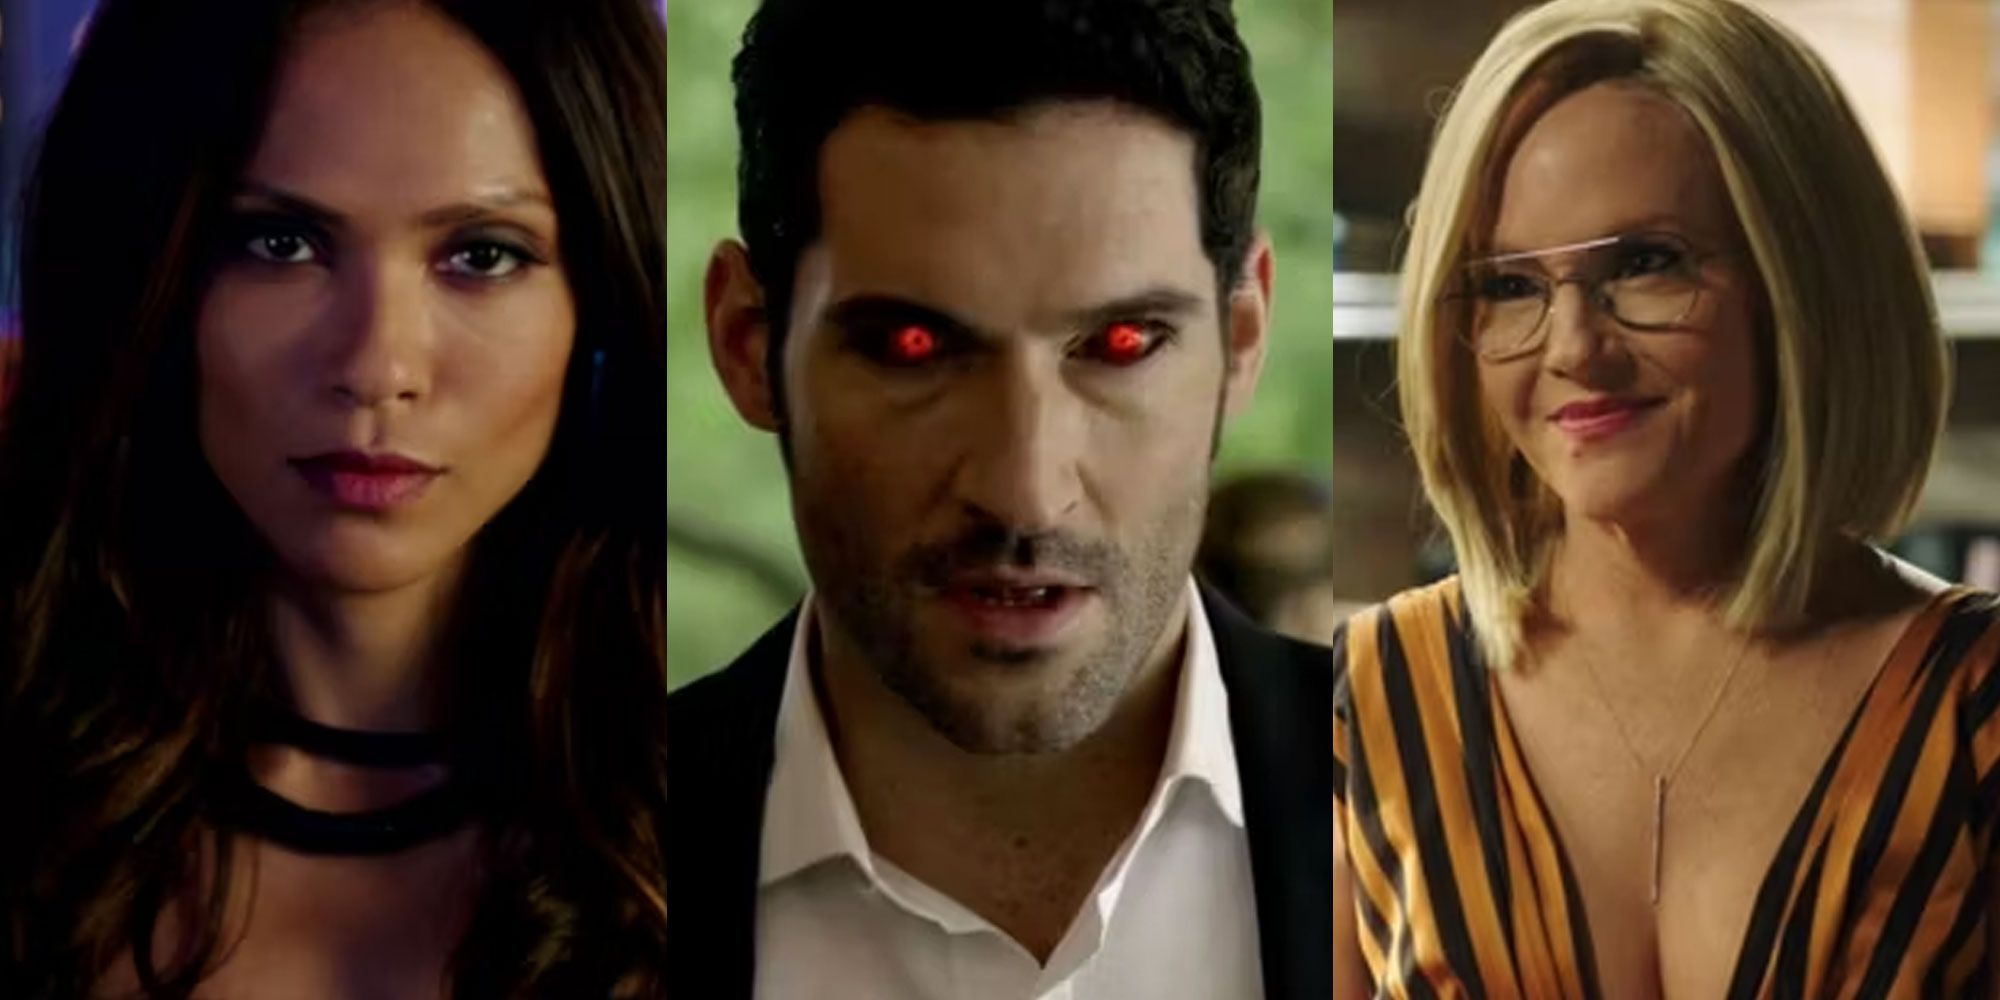 A split image features Maze, Lucifer, and Linda from Netflix's Lucifer series